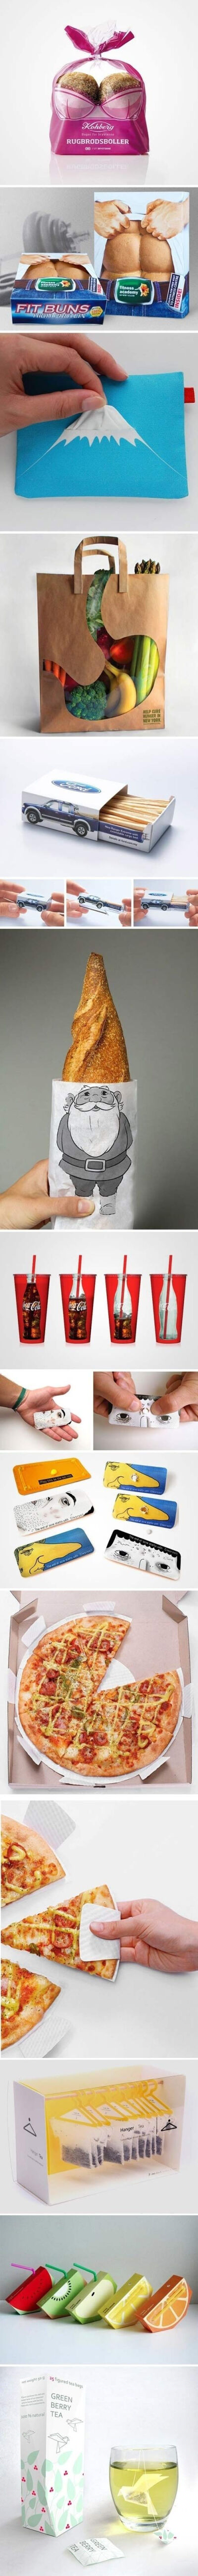 Clever Packaging